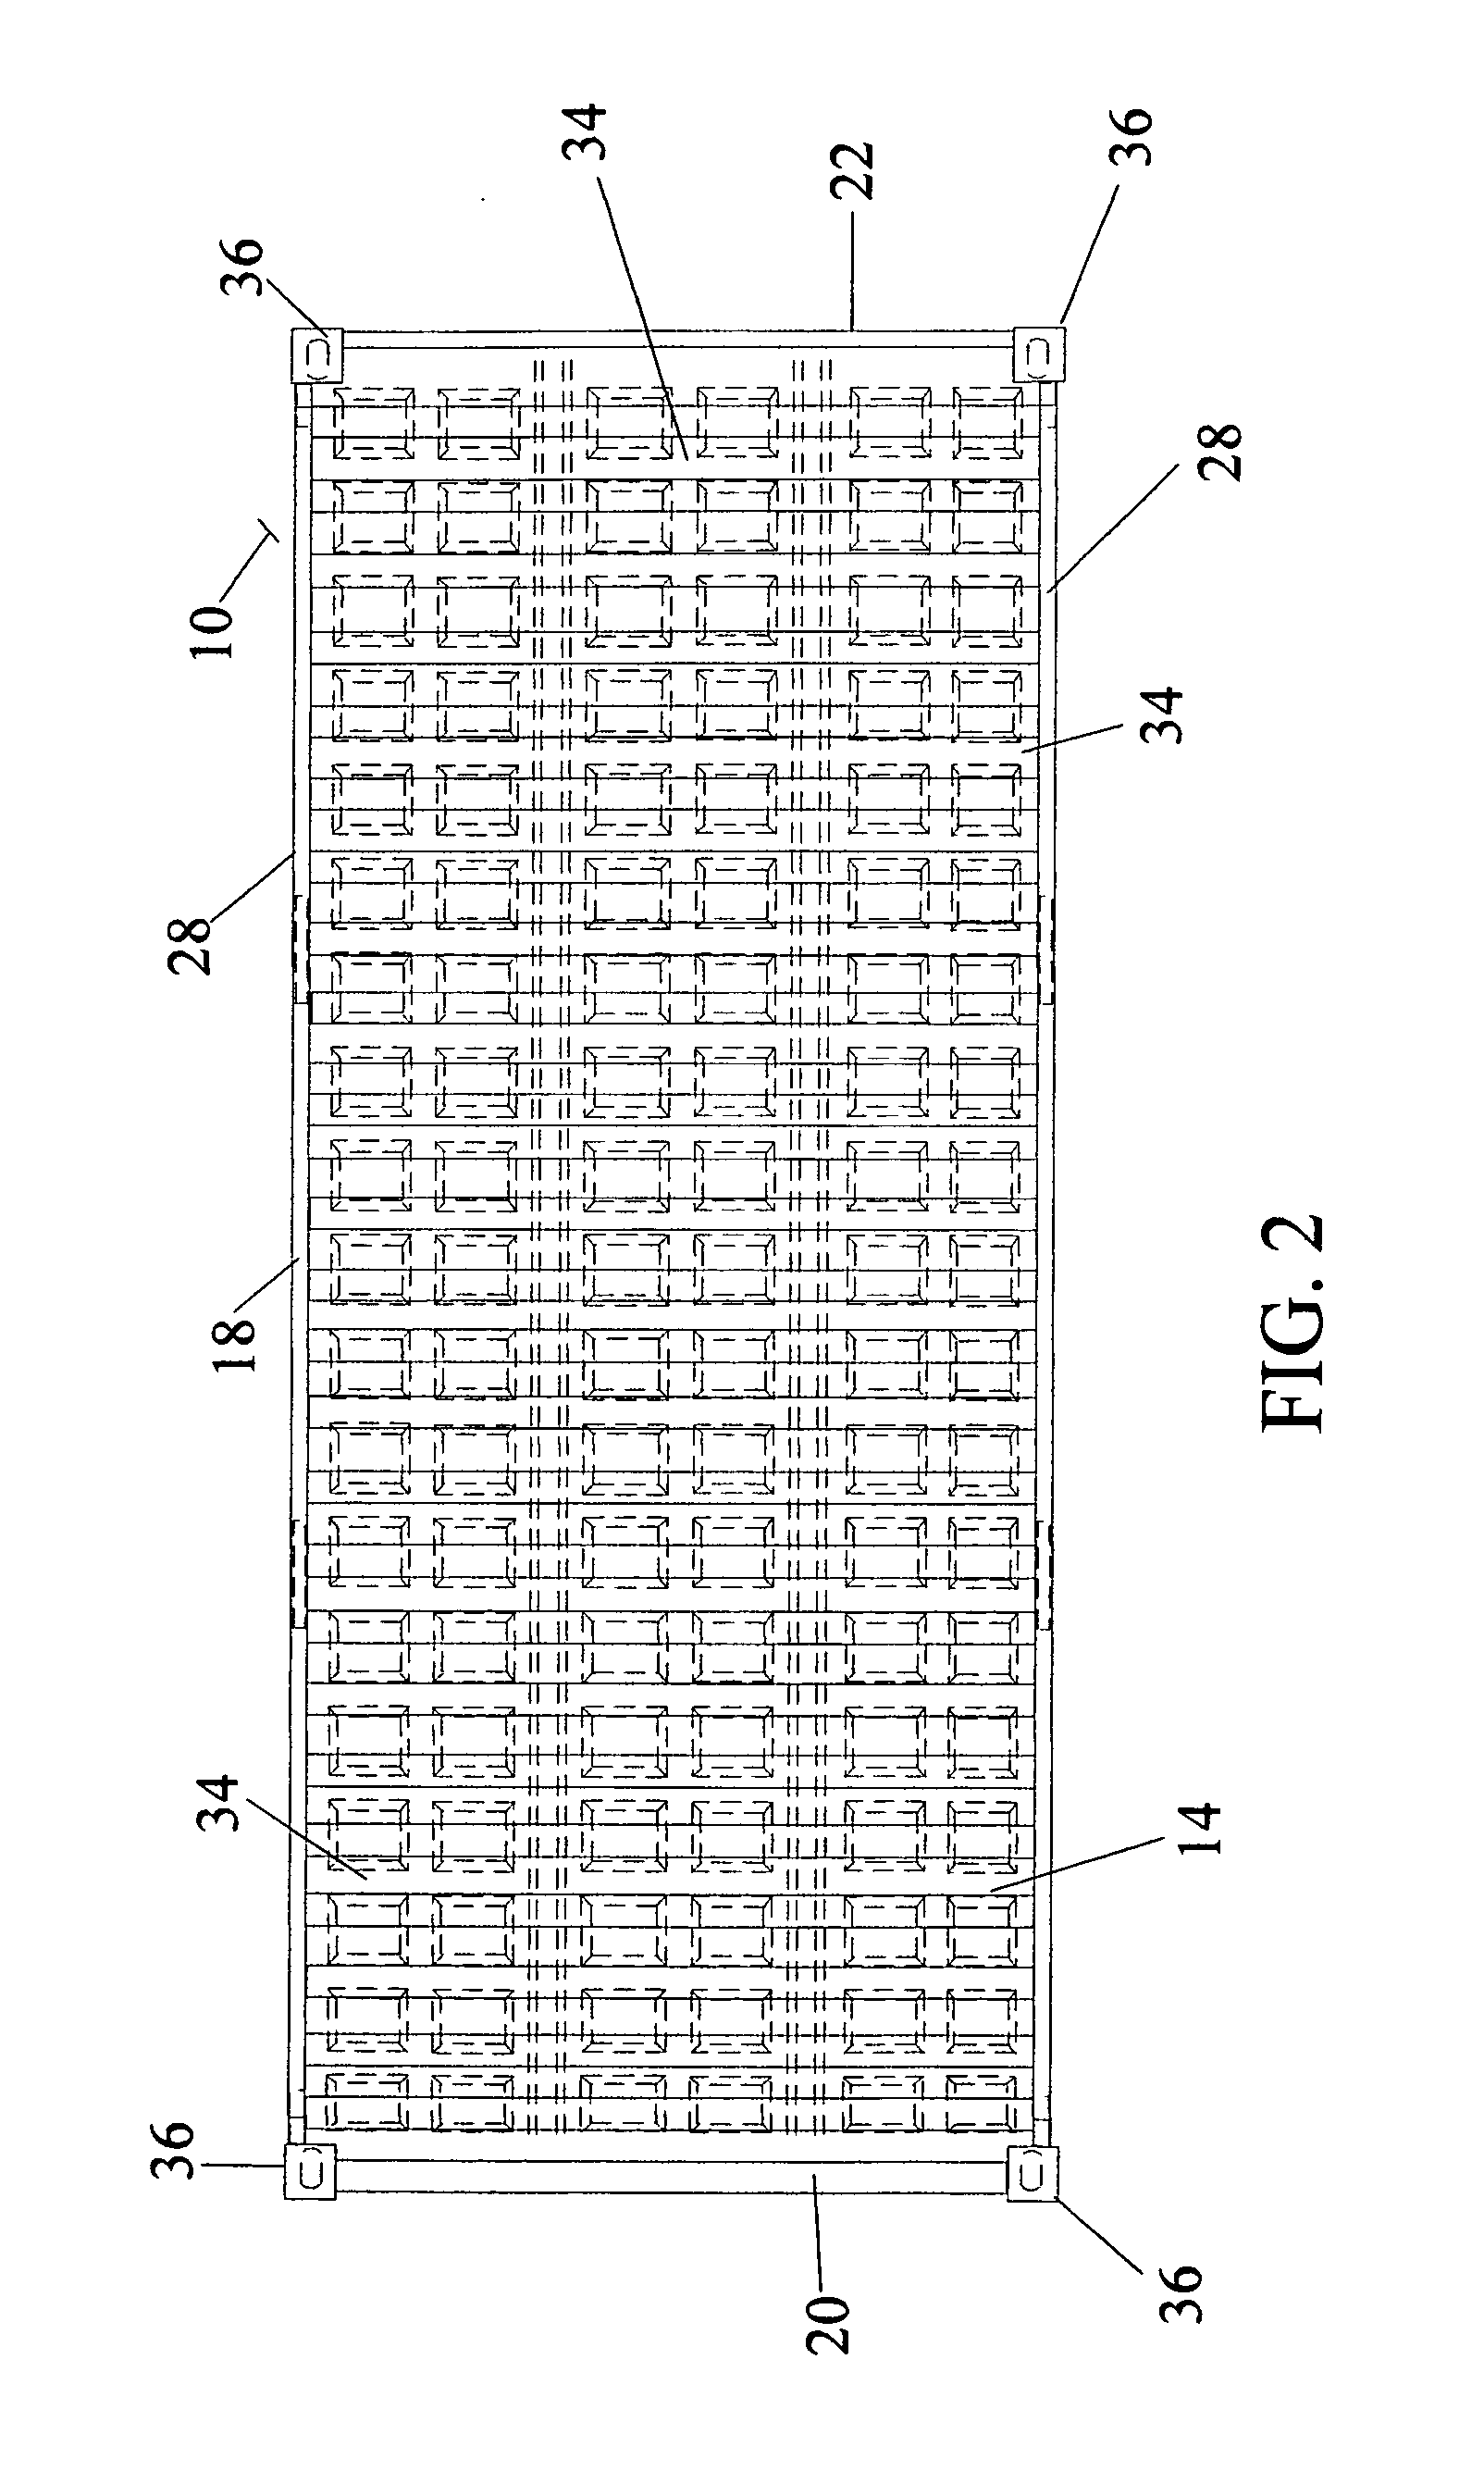 Smart hybrid intermodal recyclable shipping container, and method and apparatus therefor